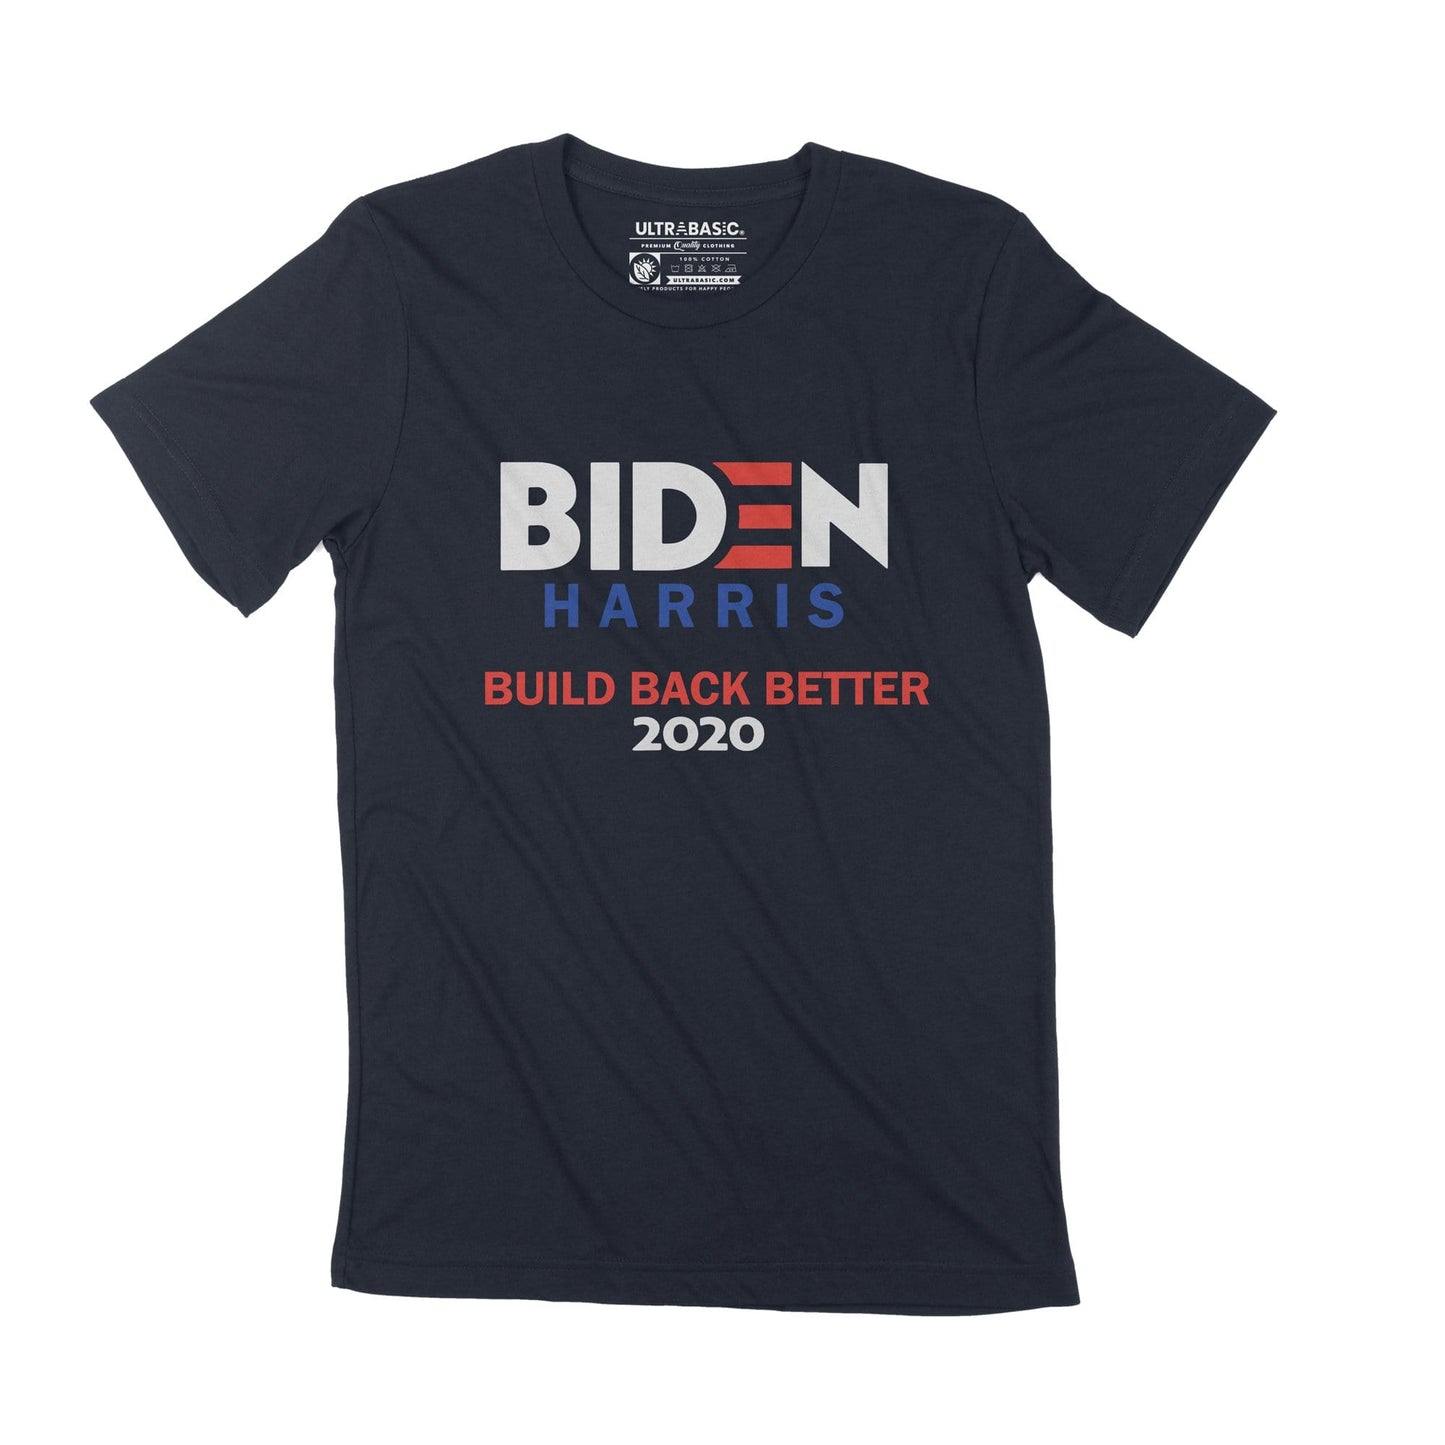 democratic president president kamala politician democrat election gift vote blue campaign vintage tees obama democrate women apparel american flag bye don byedon merchandise shirt anti donald trump usa democrats liberal truth over facts 